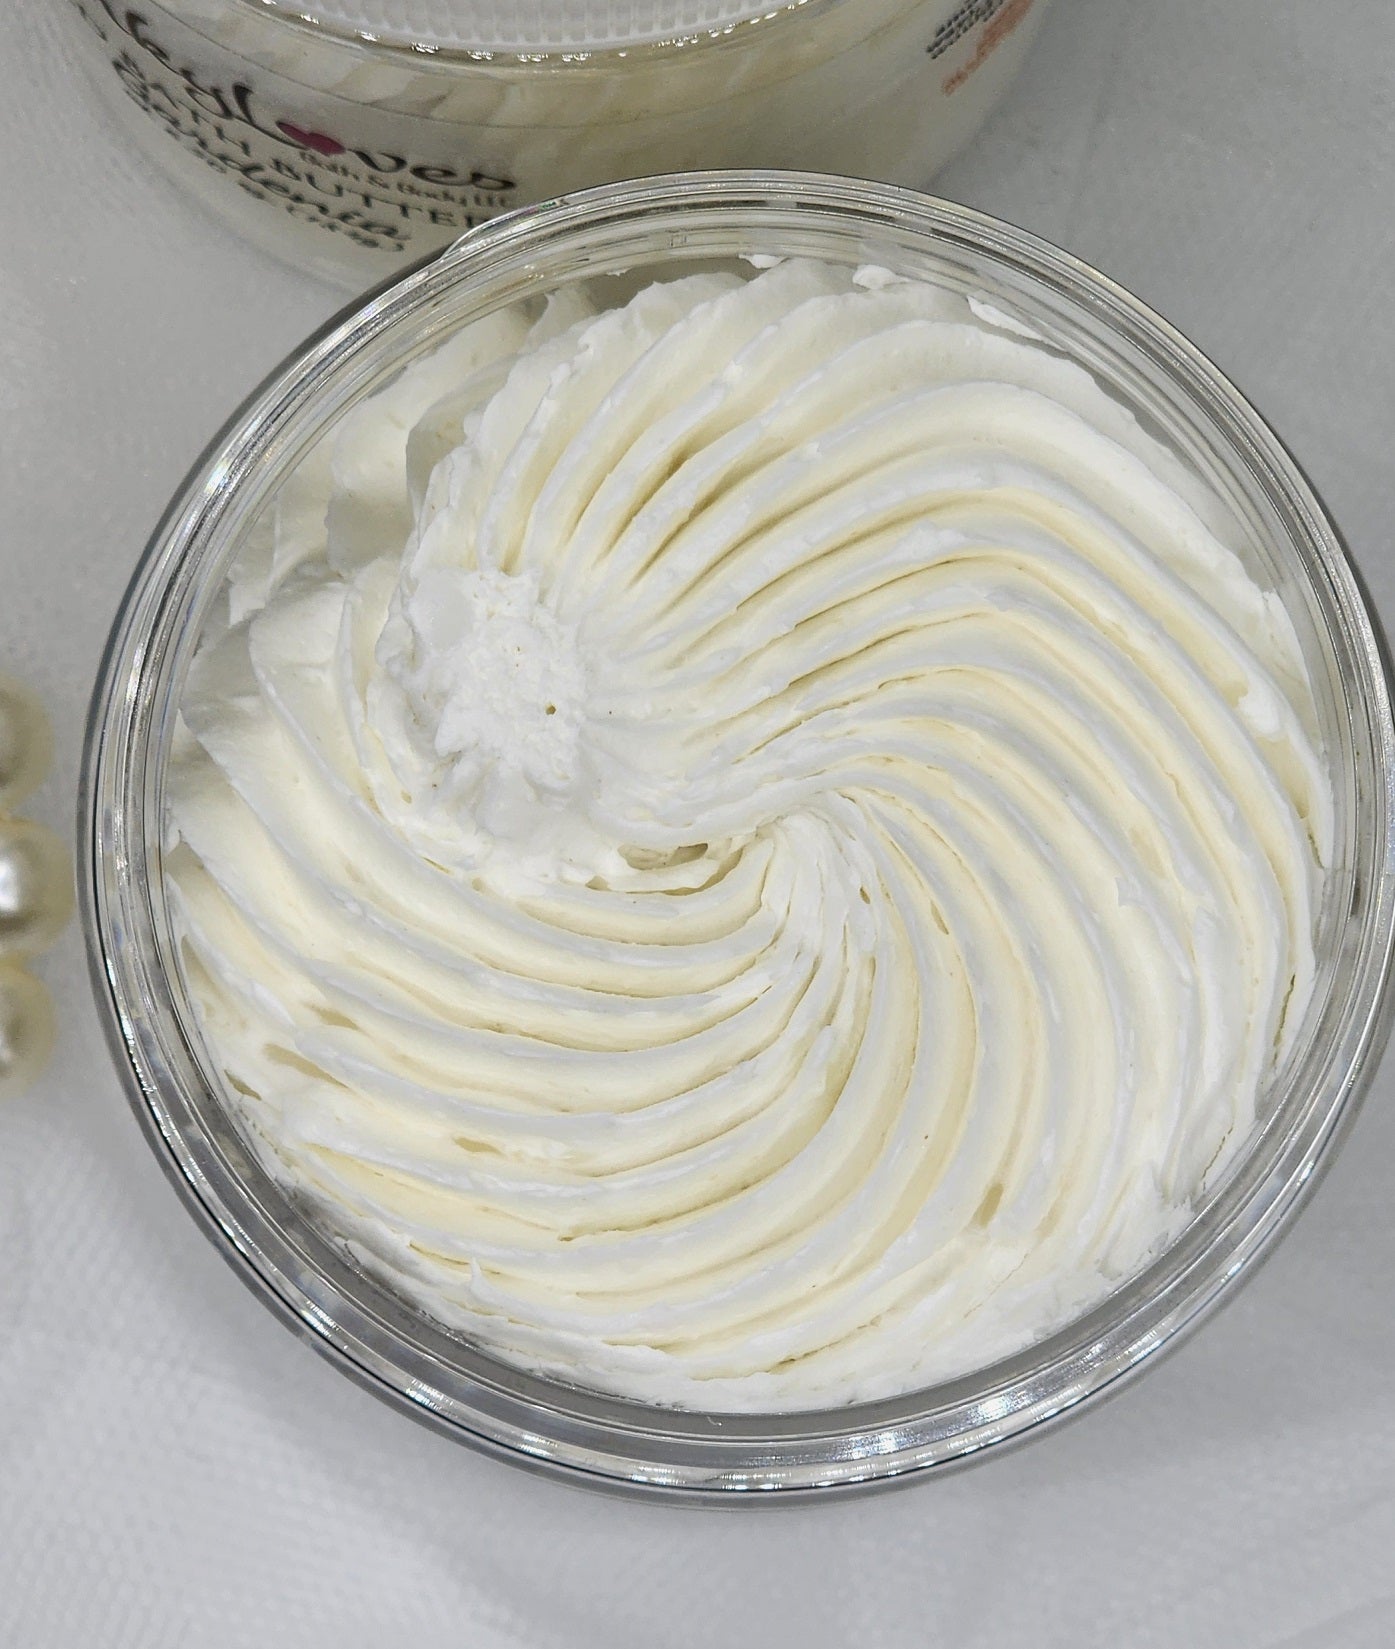 GARDENIA Whipped Bath Butter Soap / Gift Idea / Luxury Product / Cocoa Butter